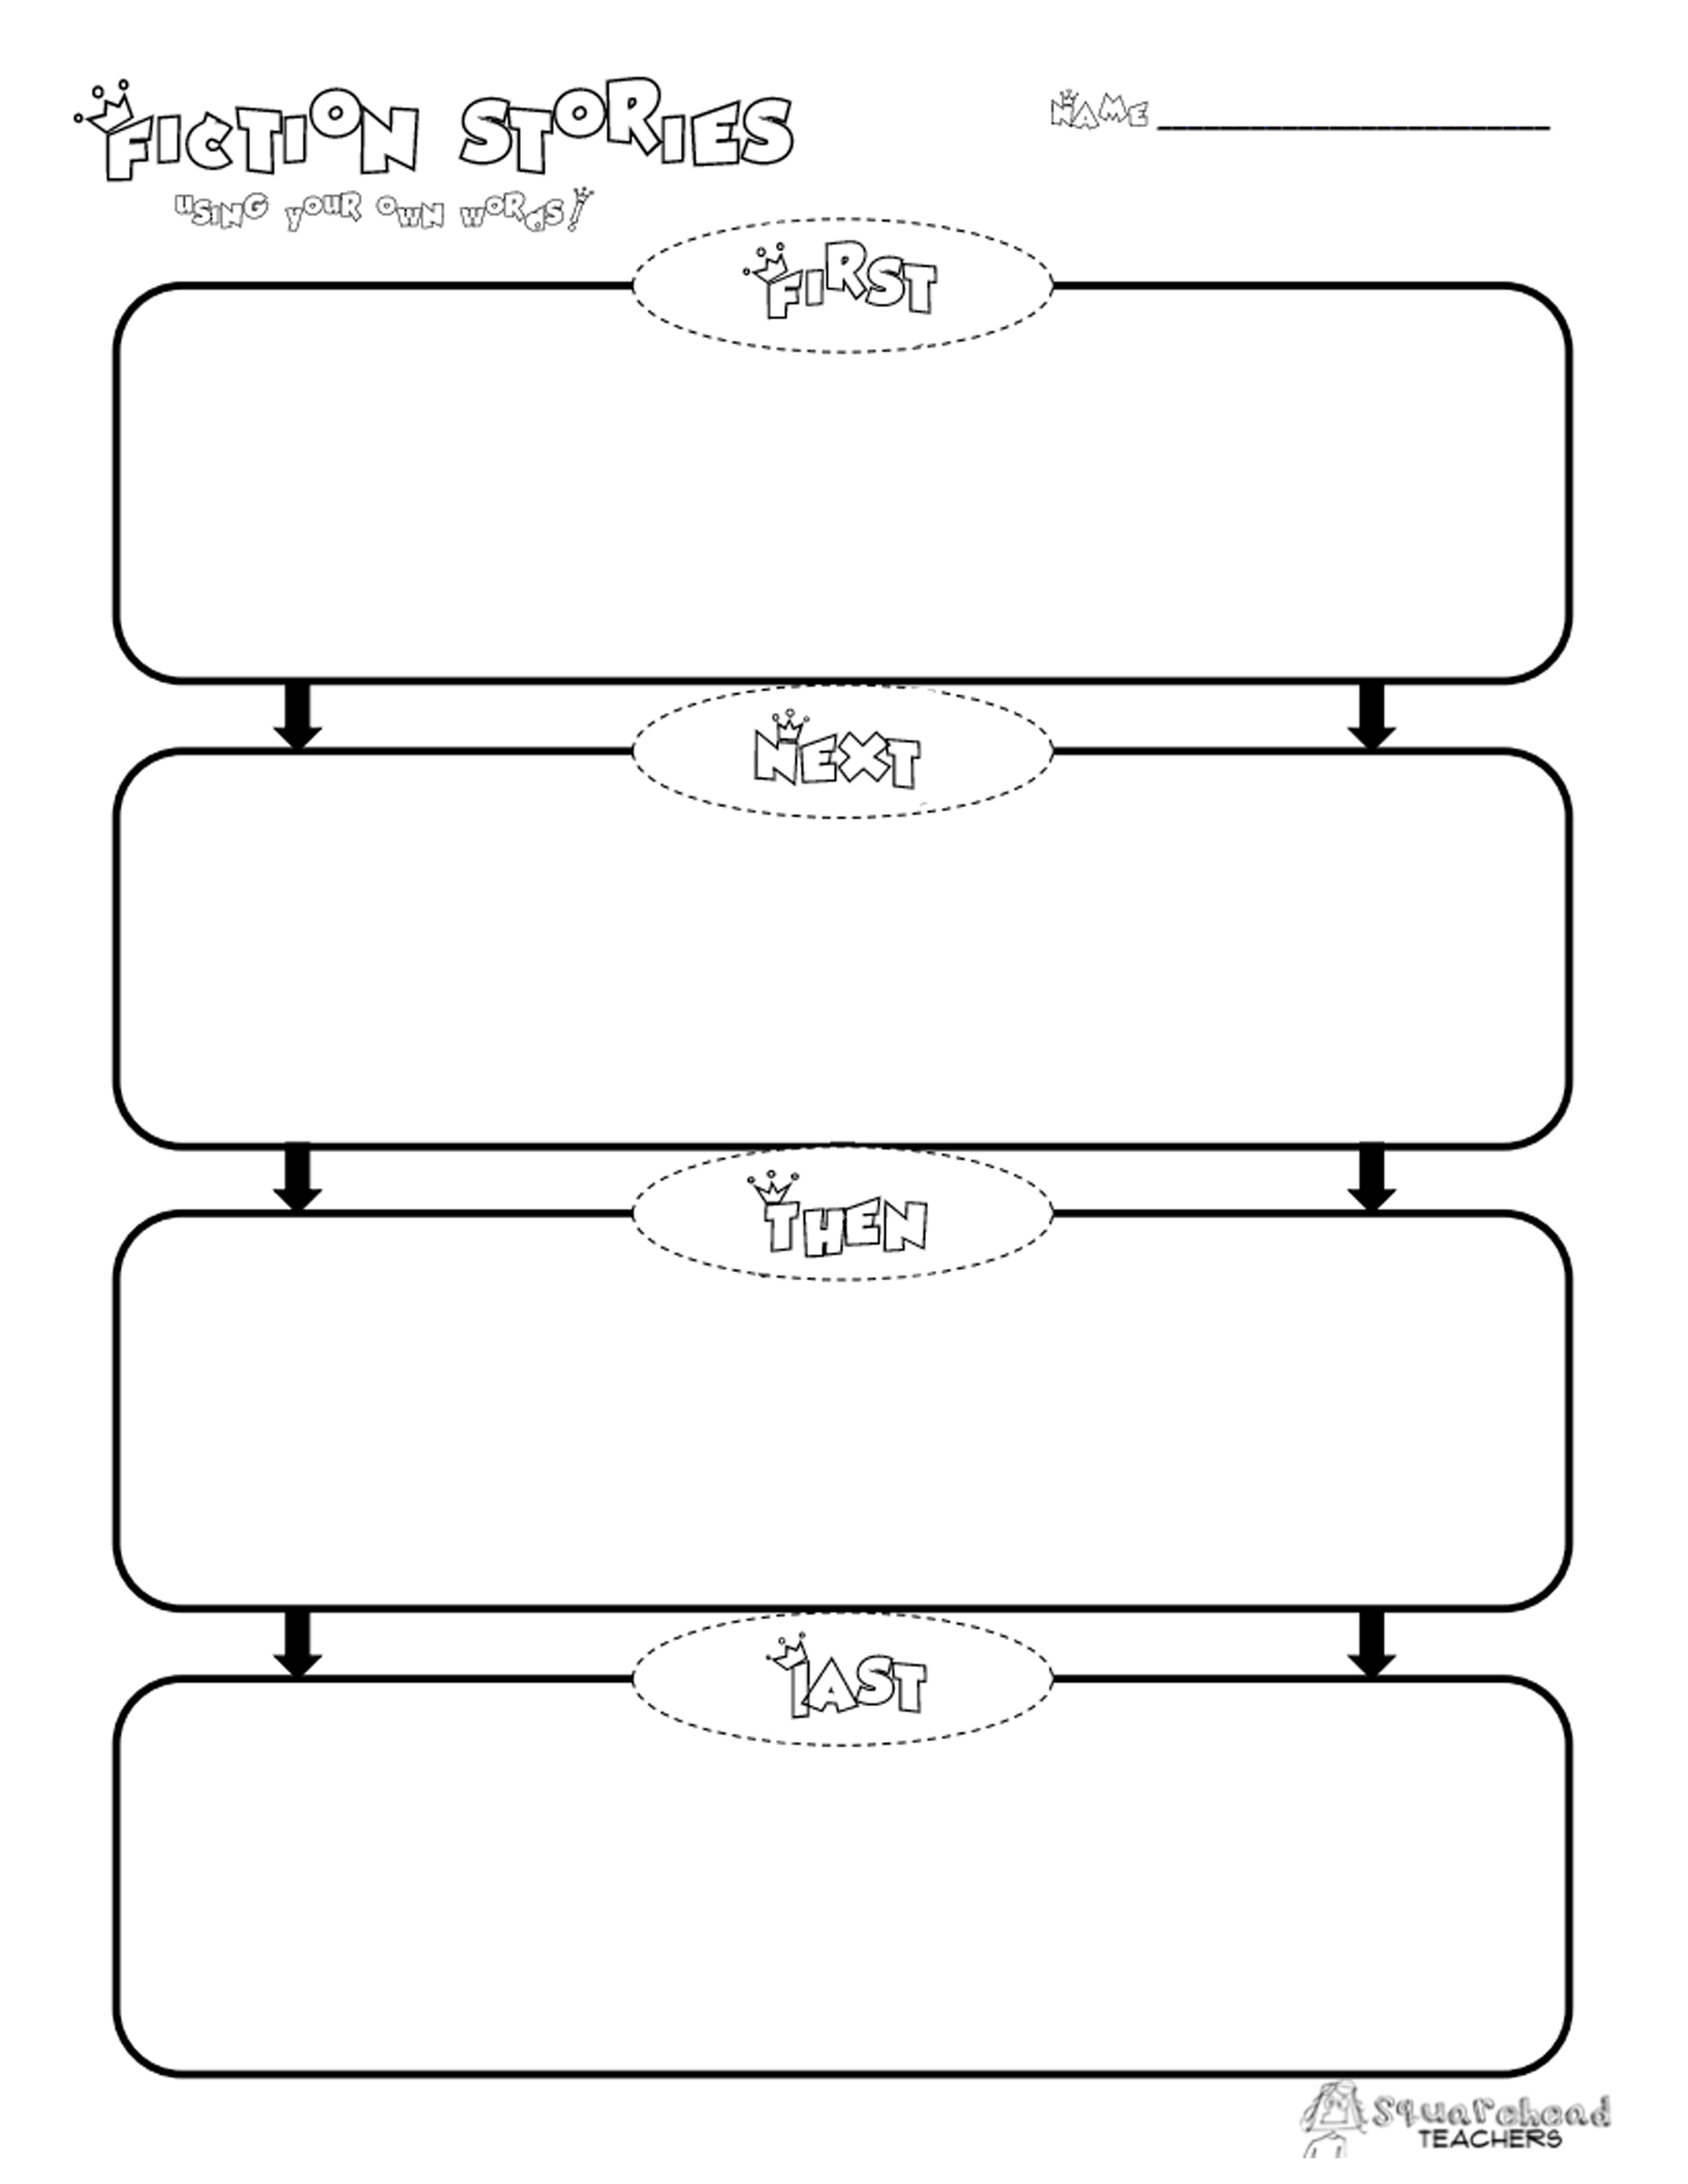 15-graphic-organizers-for-teachers-images-teaching-graphic-organizers